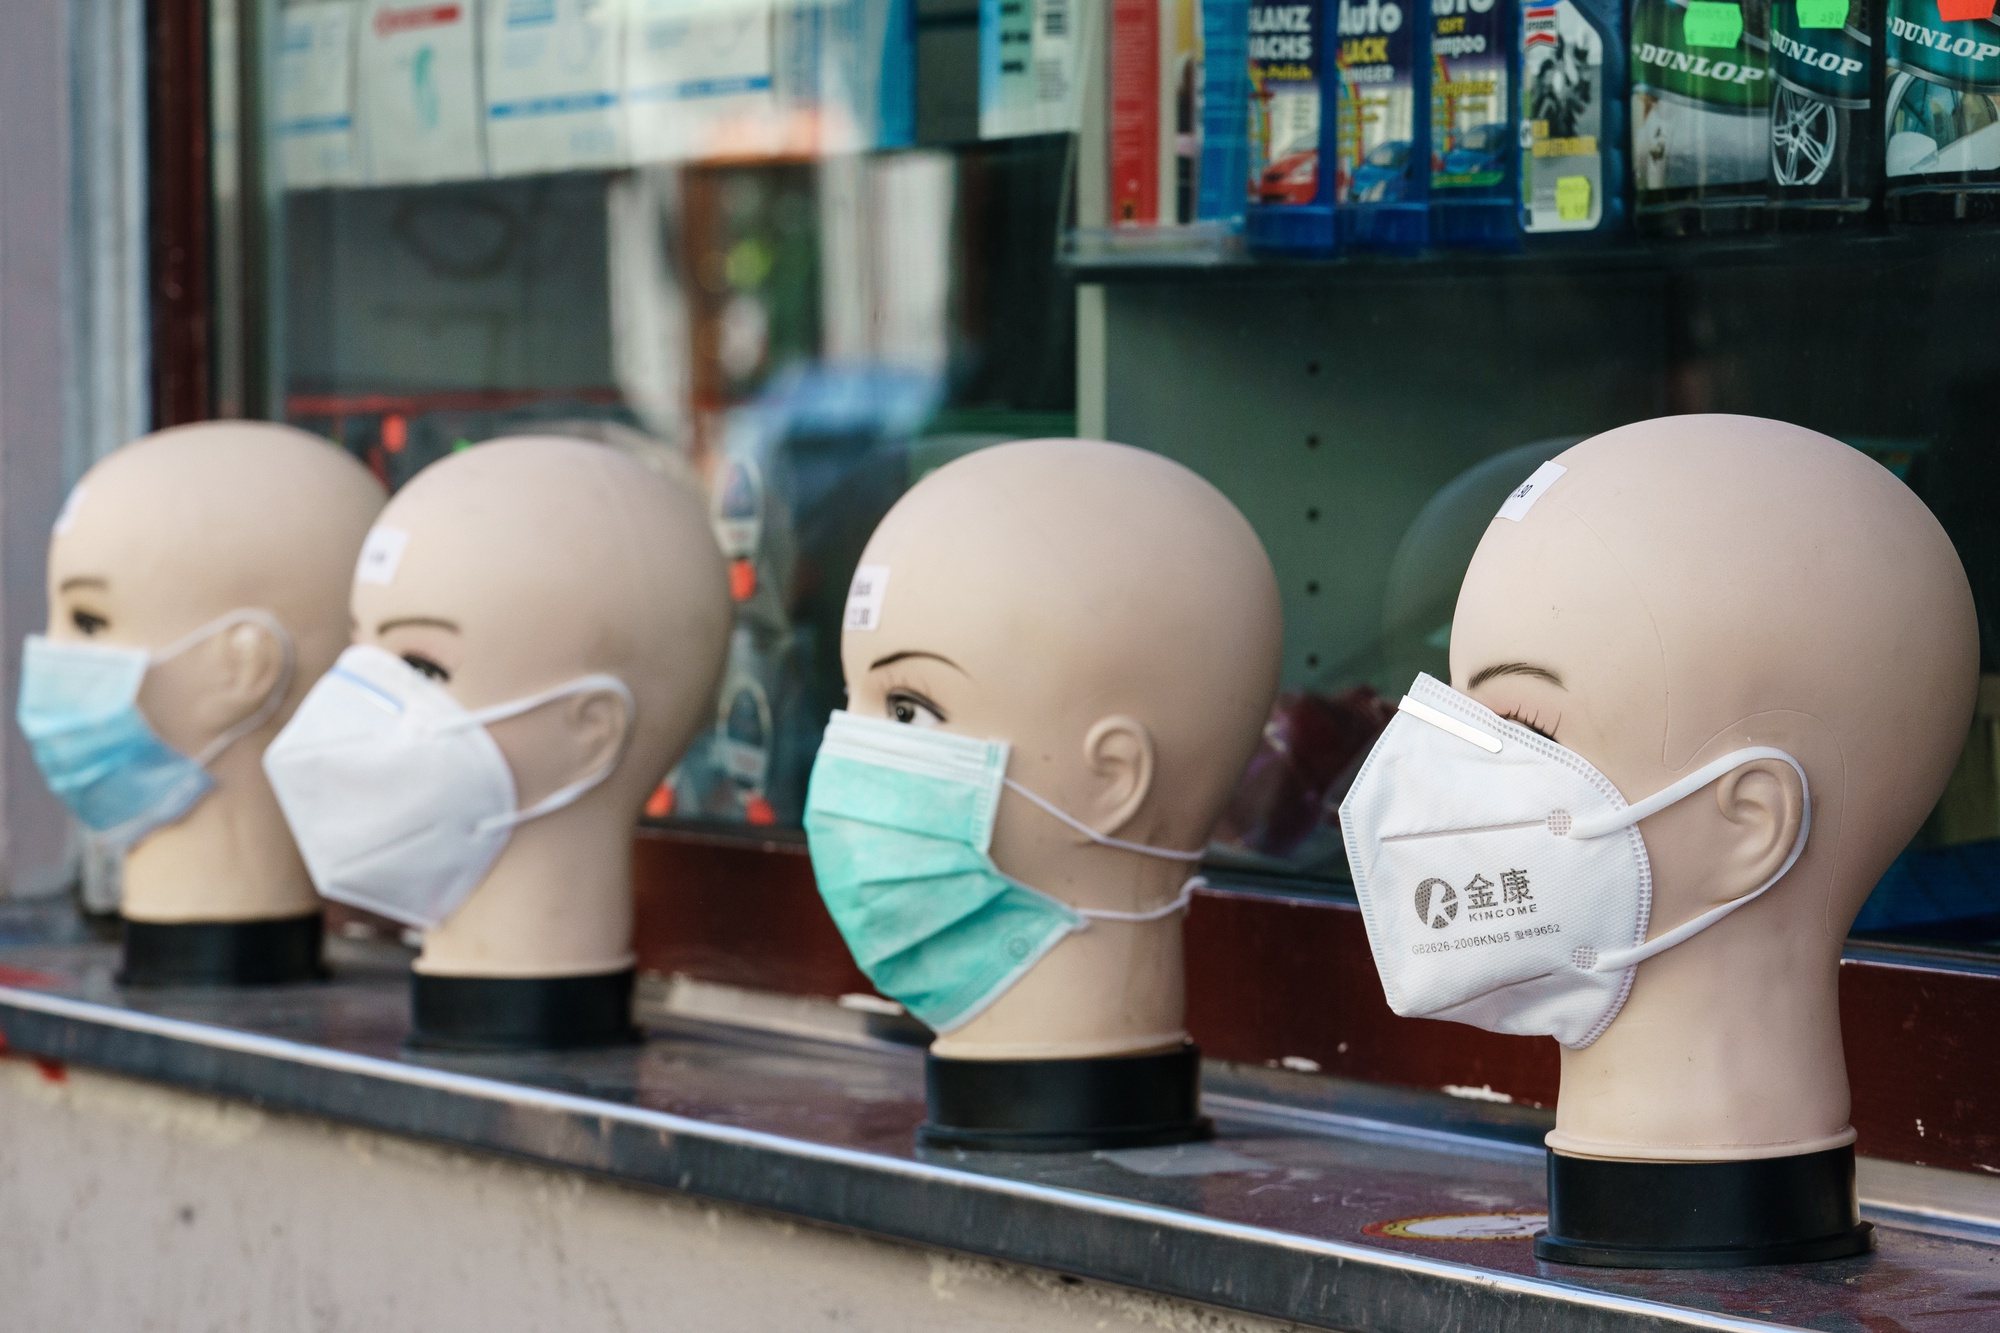 epa08346194 Face masks are on display at a shop in the Berlin district Kreuzberg in Berlin, Germany, 06 April 2020. Due to the ongoing pandemic of the COVID-19 disease caused by the SARS-CoV-2 coronavirus, most of the shops, museums and concert halls in Berlin are closed. Weekly markets, pharmacies, banking institutes, supermarkets, petrol stations and some other shops are still opened. People are allowed to visit parks in gatherings of people containing not more than two persons or as families. Physical training alone is allowed.  EPA/CLEMENS BILAN